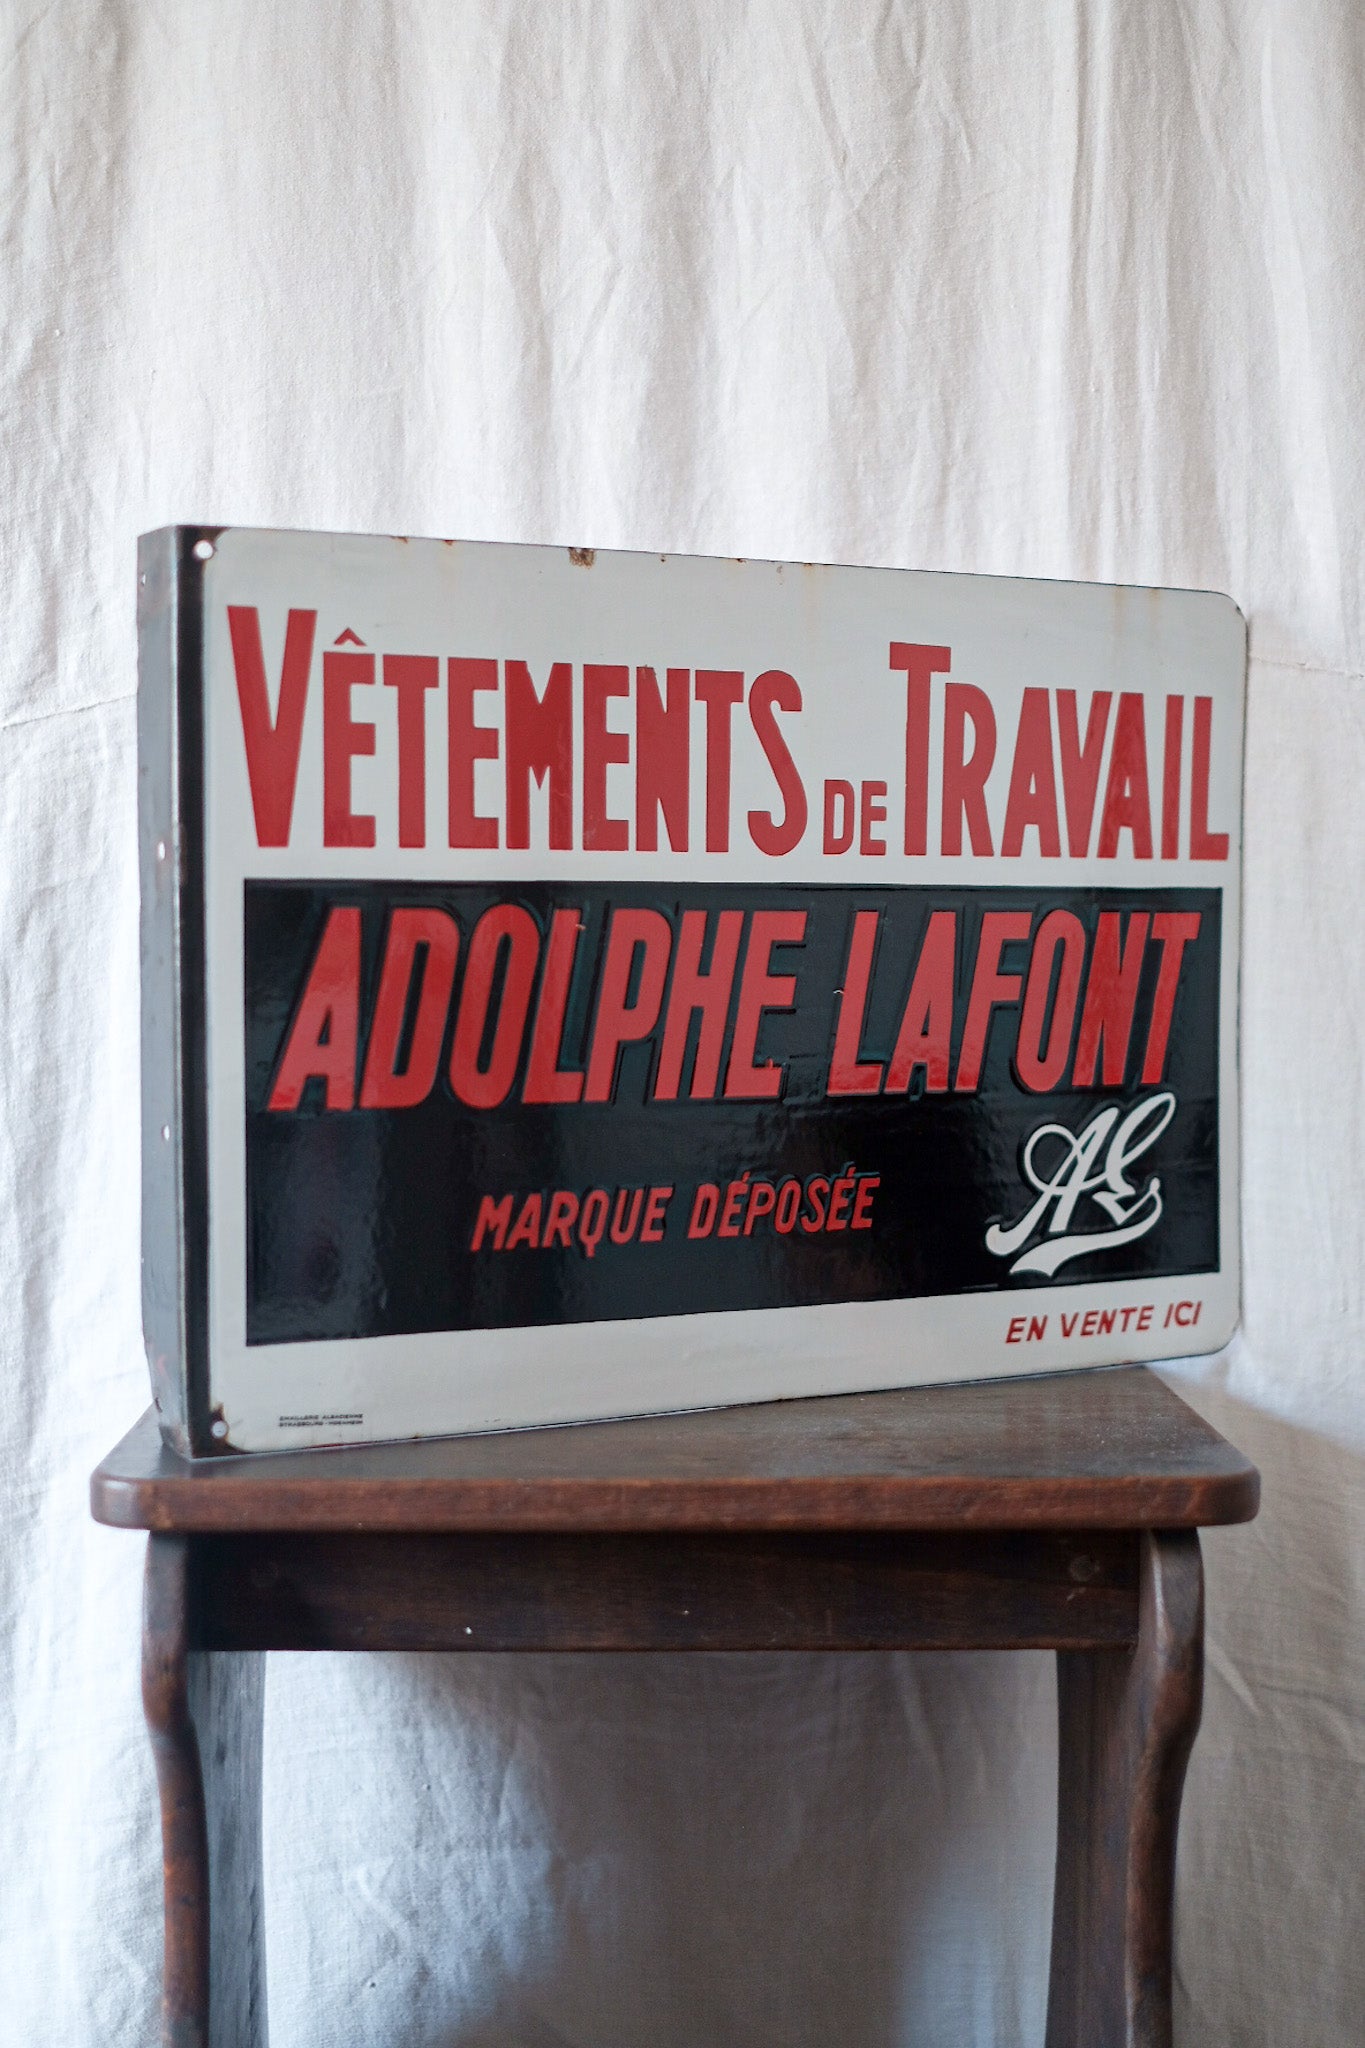 【~50's】French Vintage Enamel Plate "Adolphe Lafont"